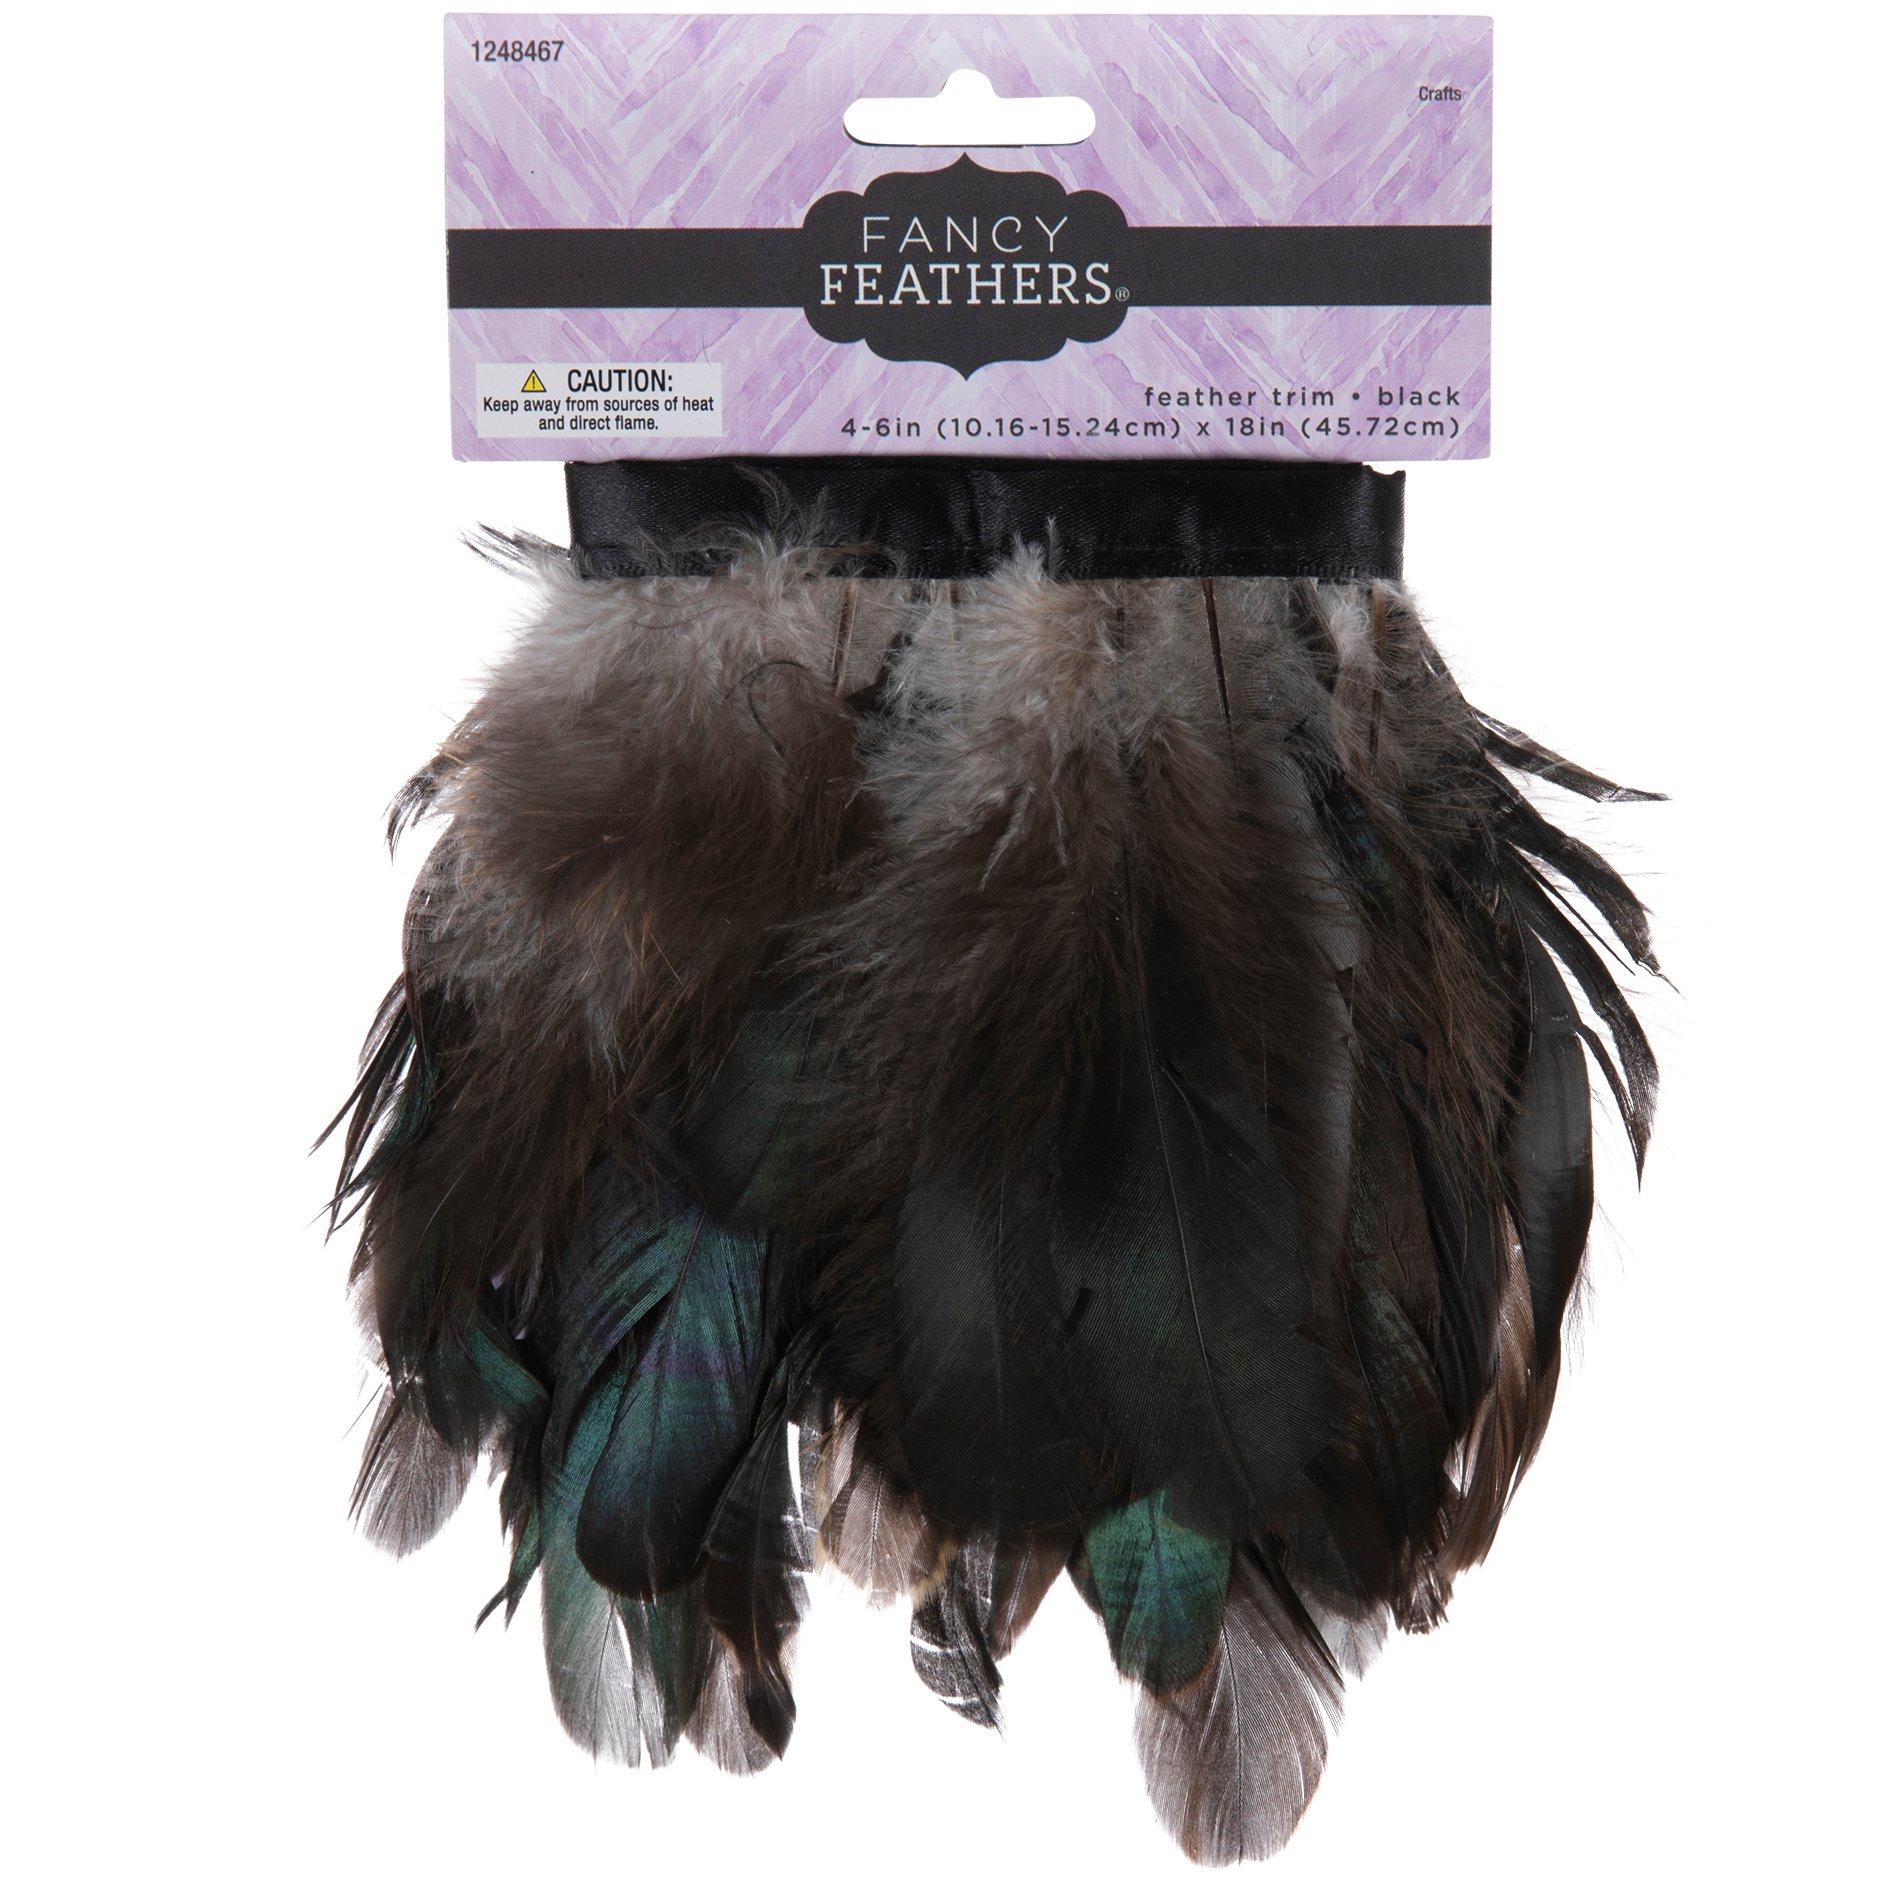 Feathers TRIM Ostrich Feathers Feather Trim Craft Feathers Color